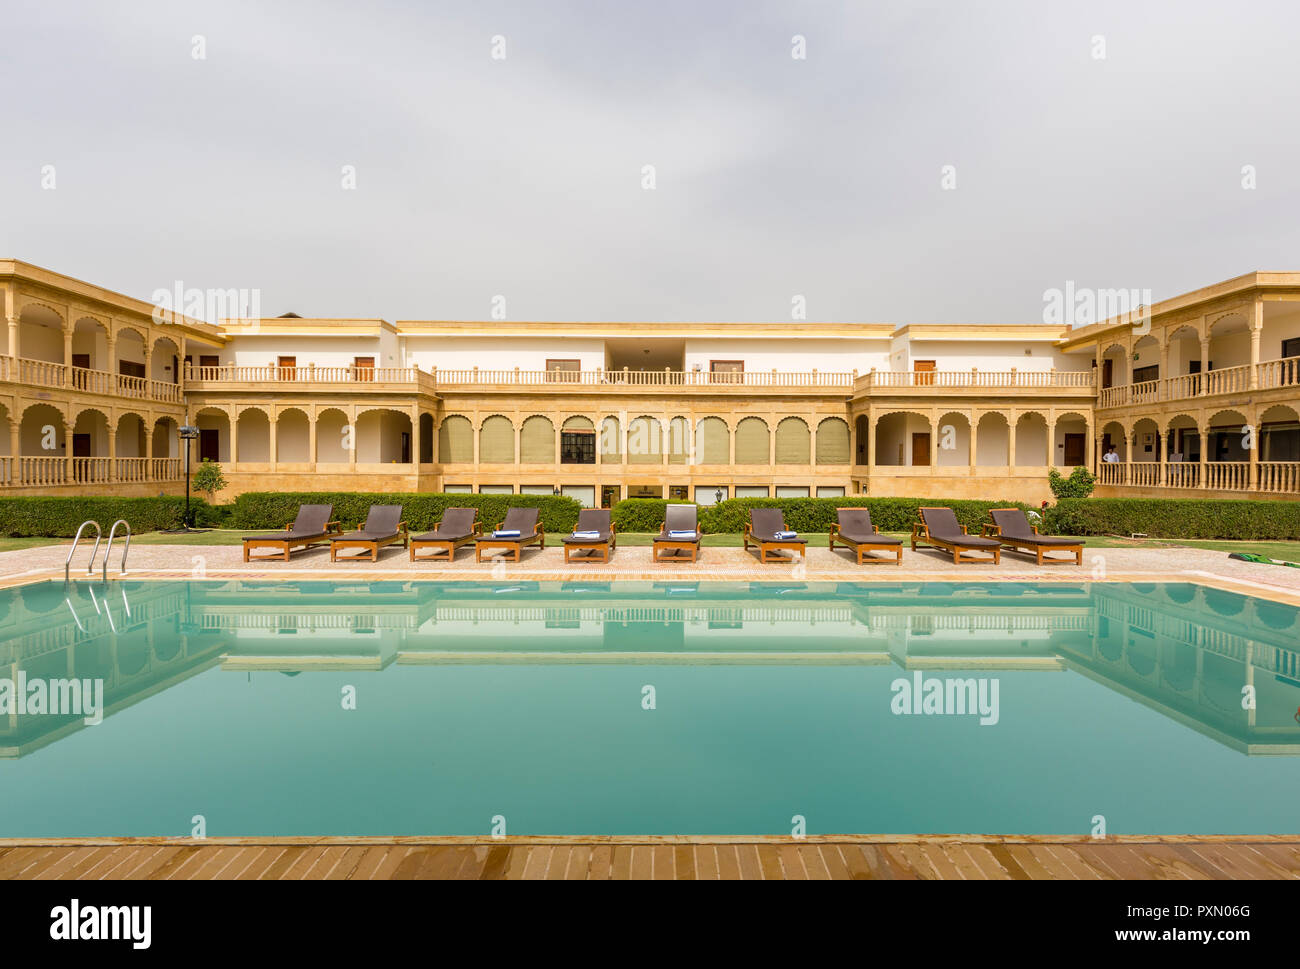 Traditional arches and Swimming pool at the Club Mahindra resort in the desert town of Jaisalmer in India Stock Photo